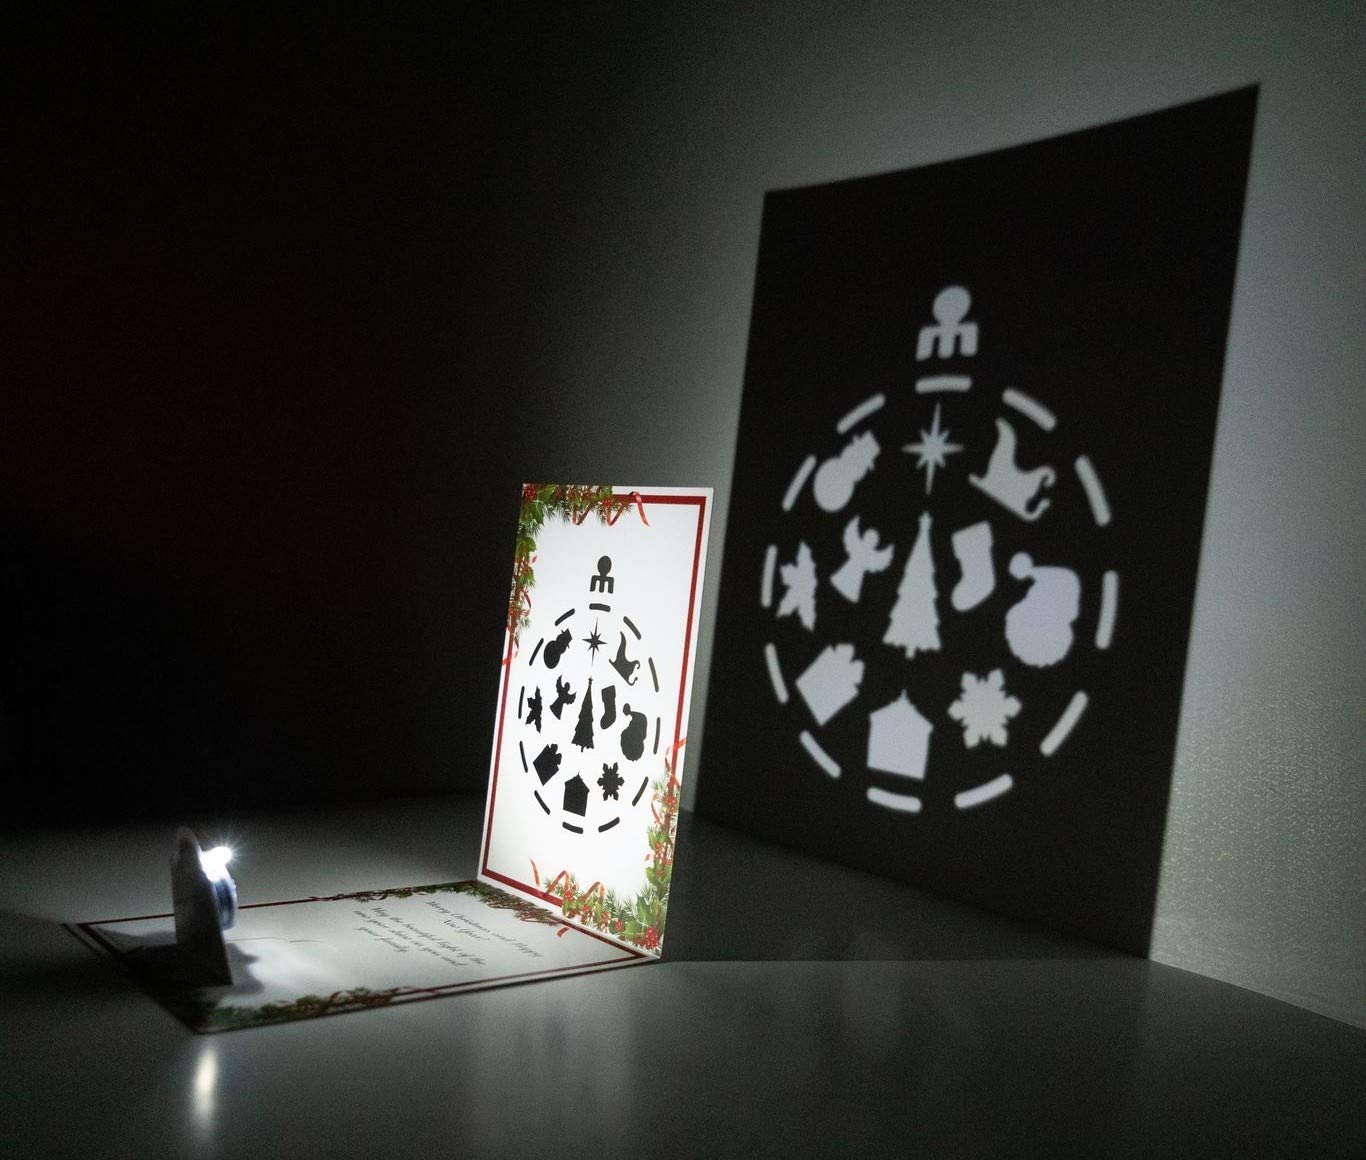 Side image of card and shadow image